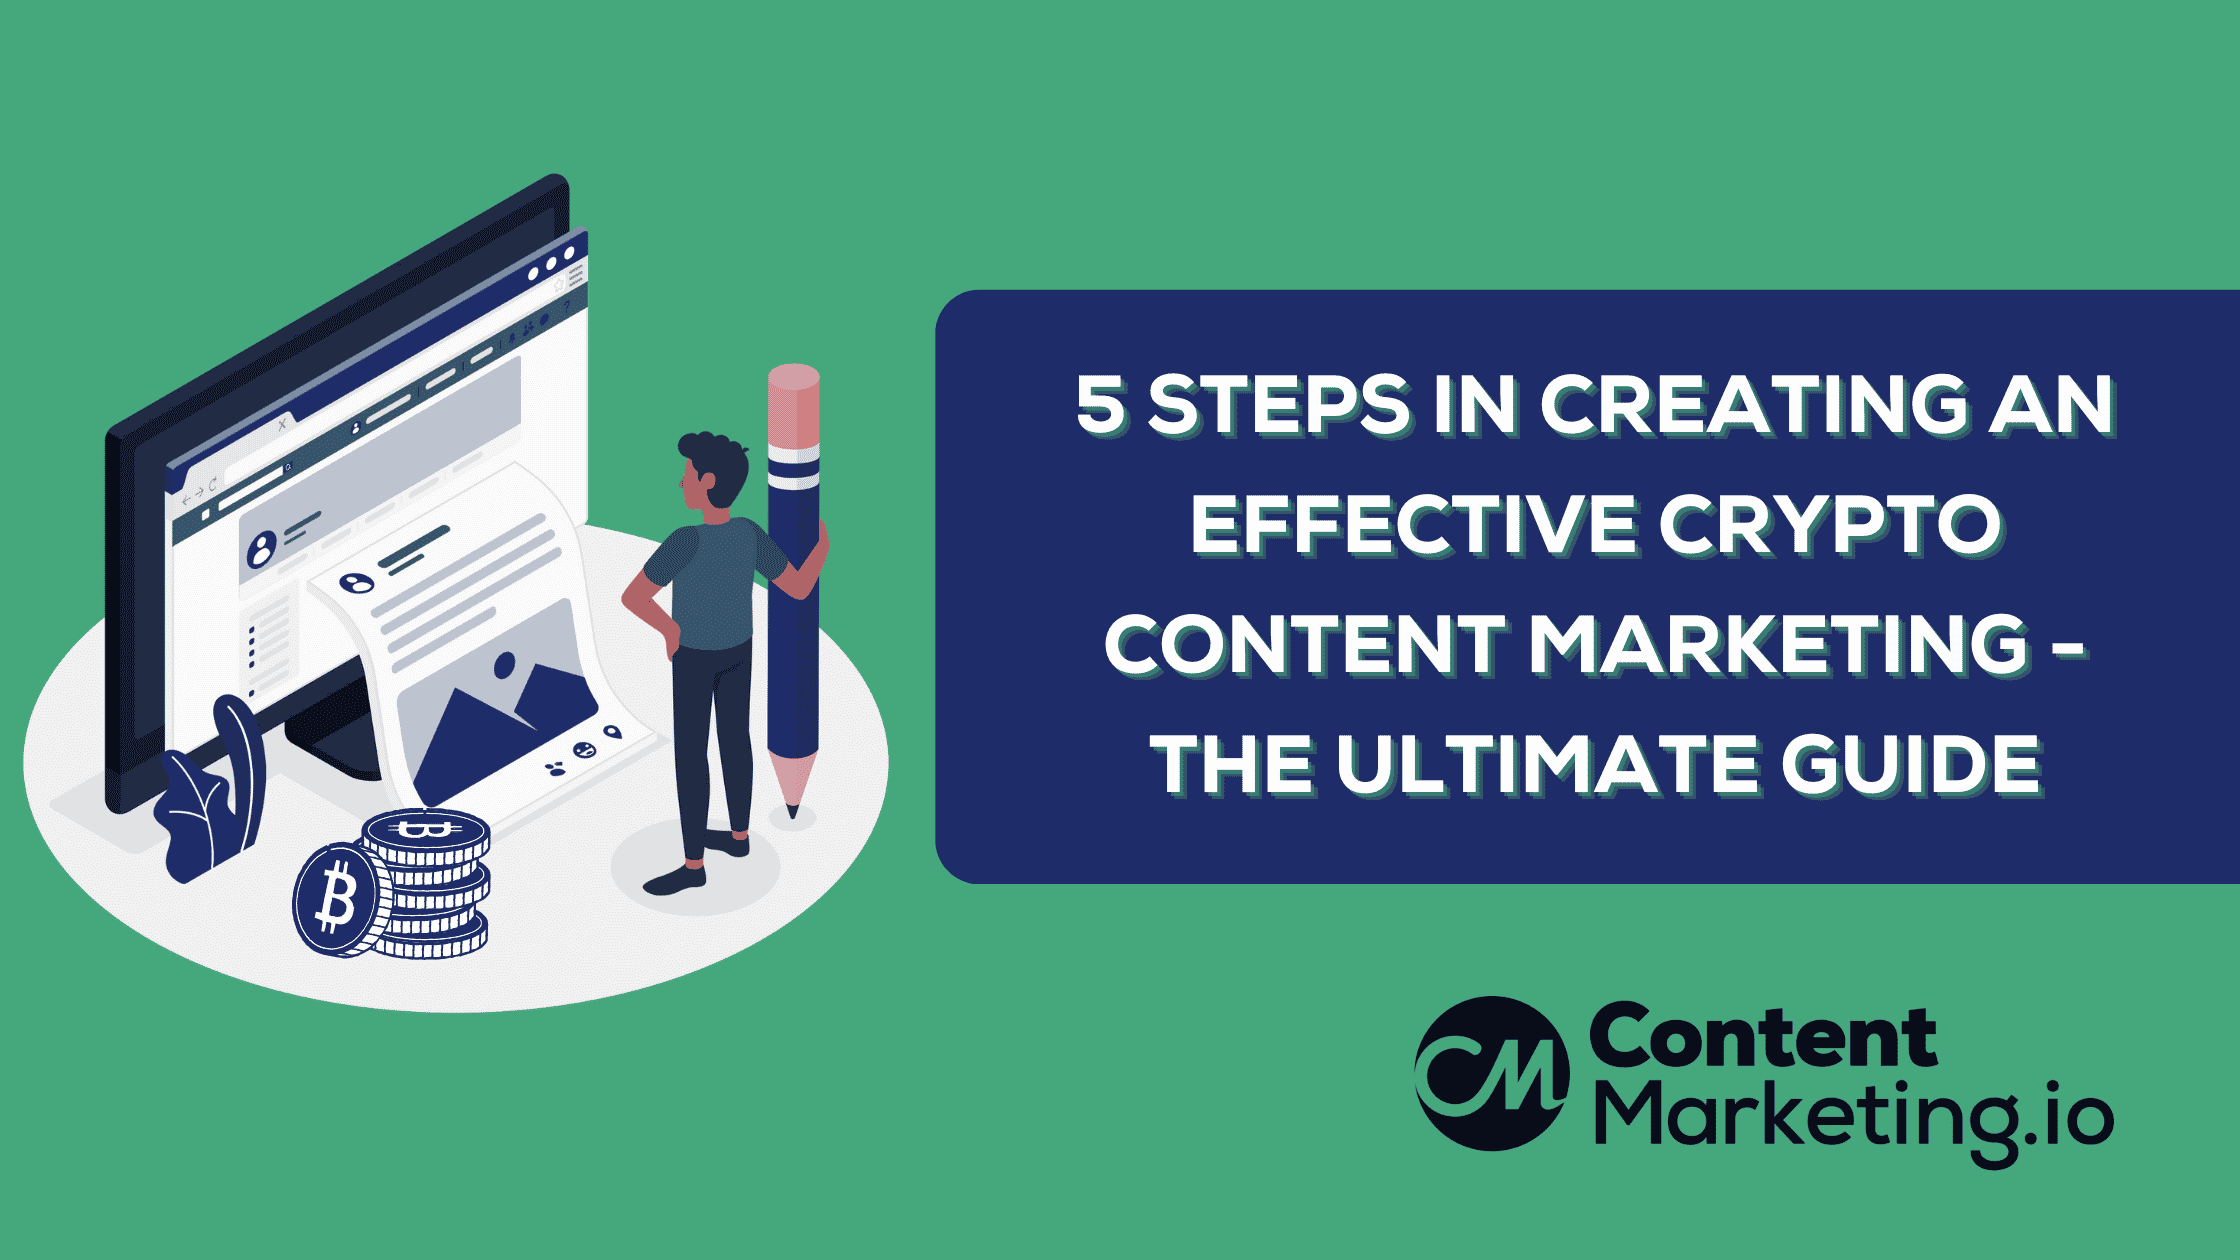 5 Steps in Creating An Effective Crypto Content Marketing - The Ultimate Guide